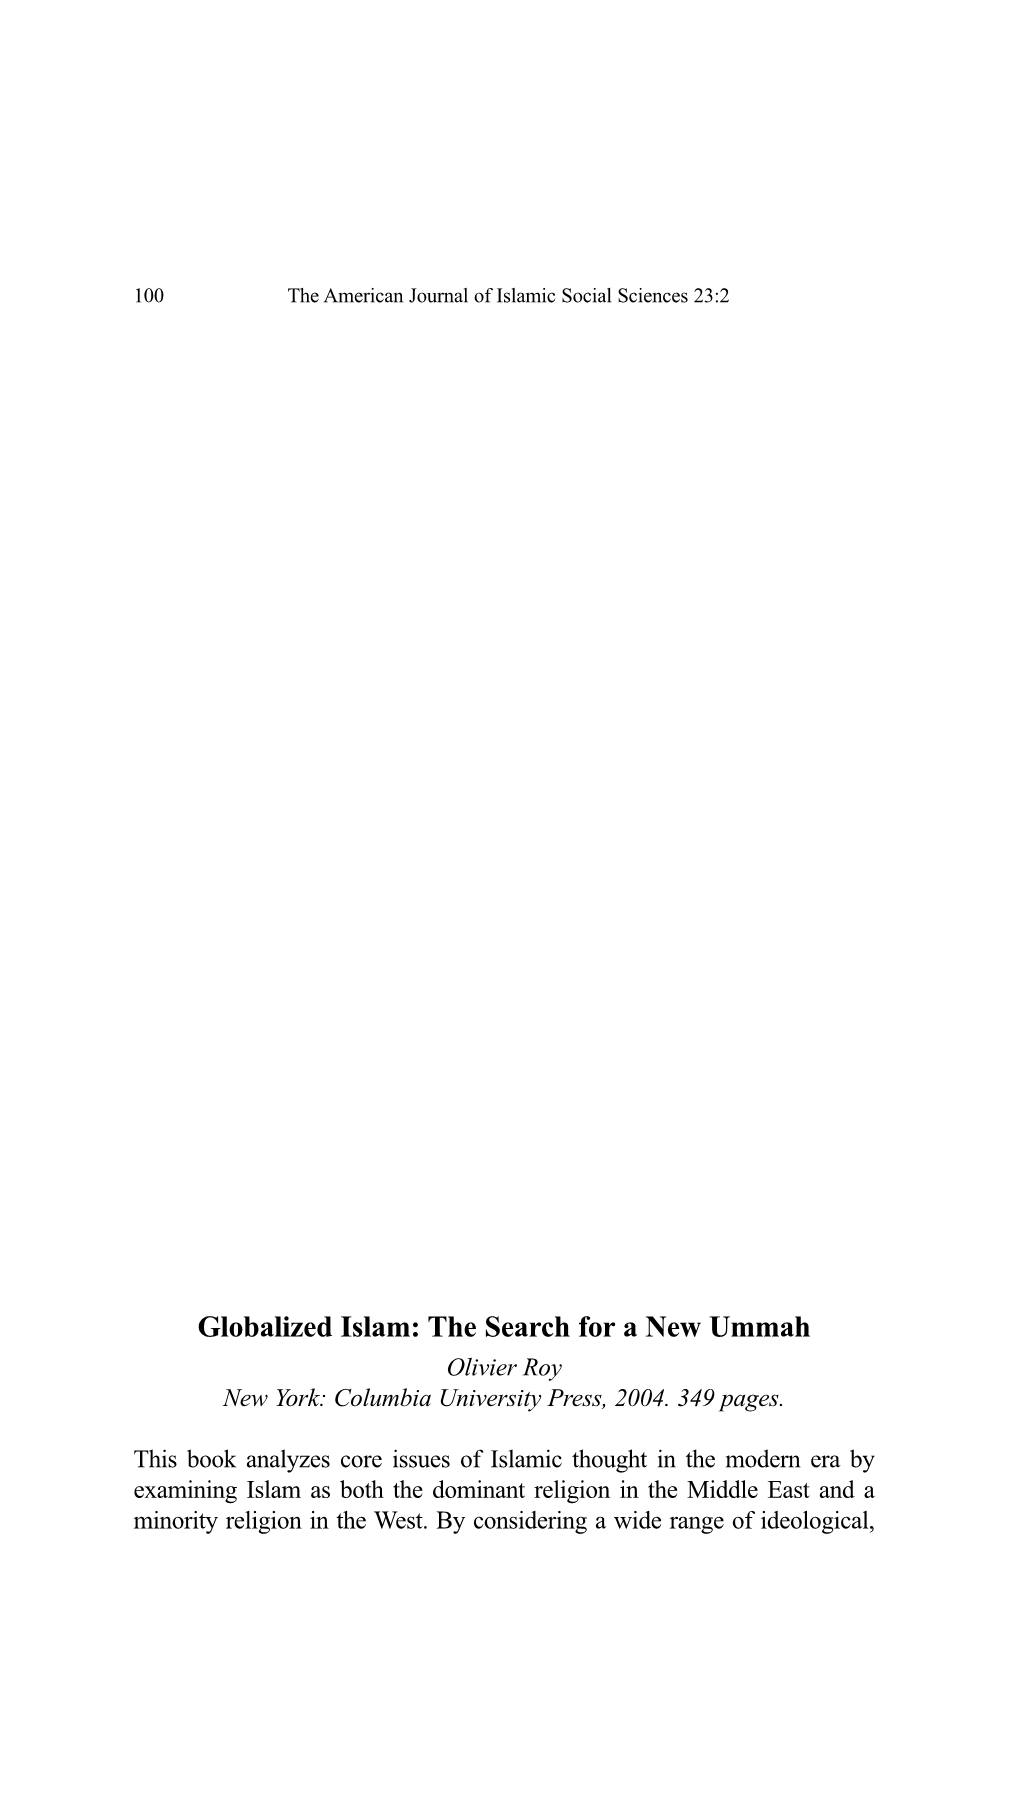 Globalized Islam: the Search for a New Ummah Olivier Roy New York: Columbia University Press, 2004